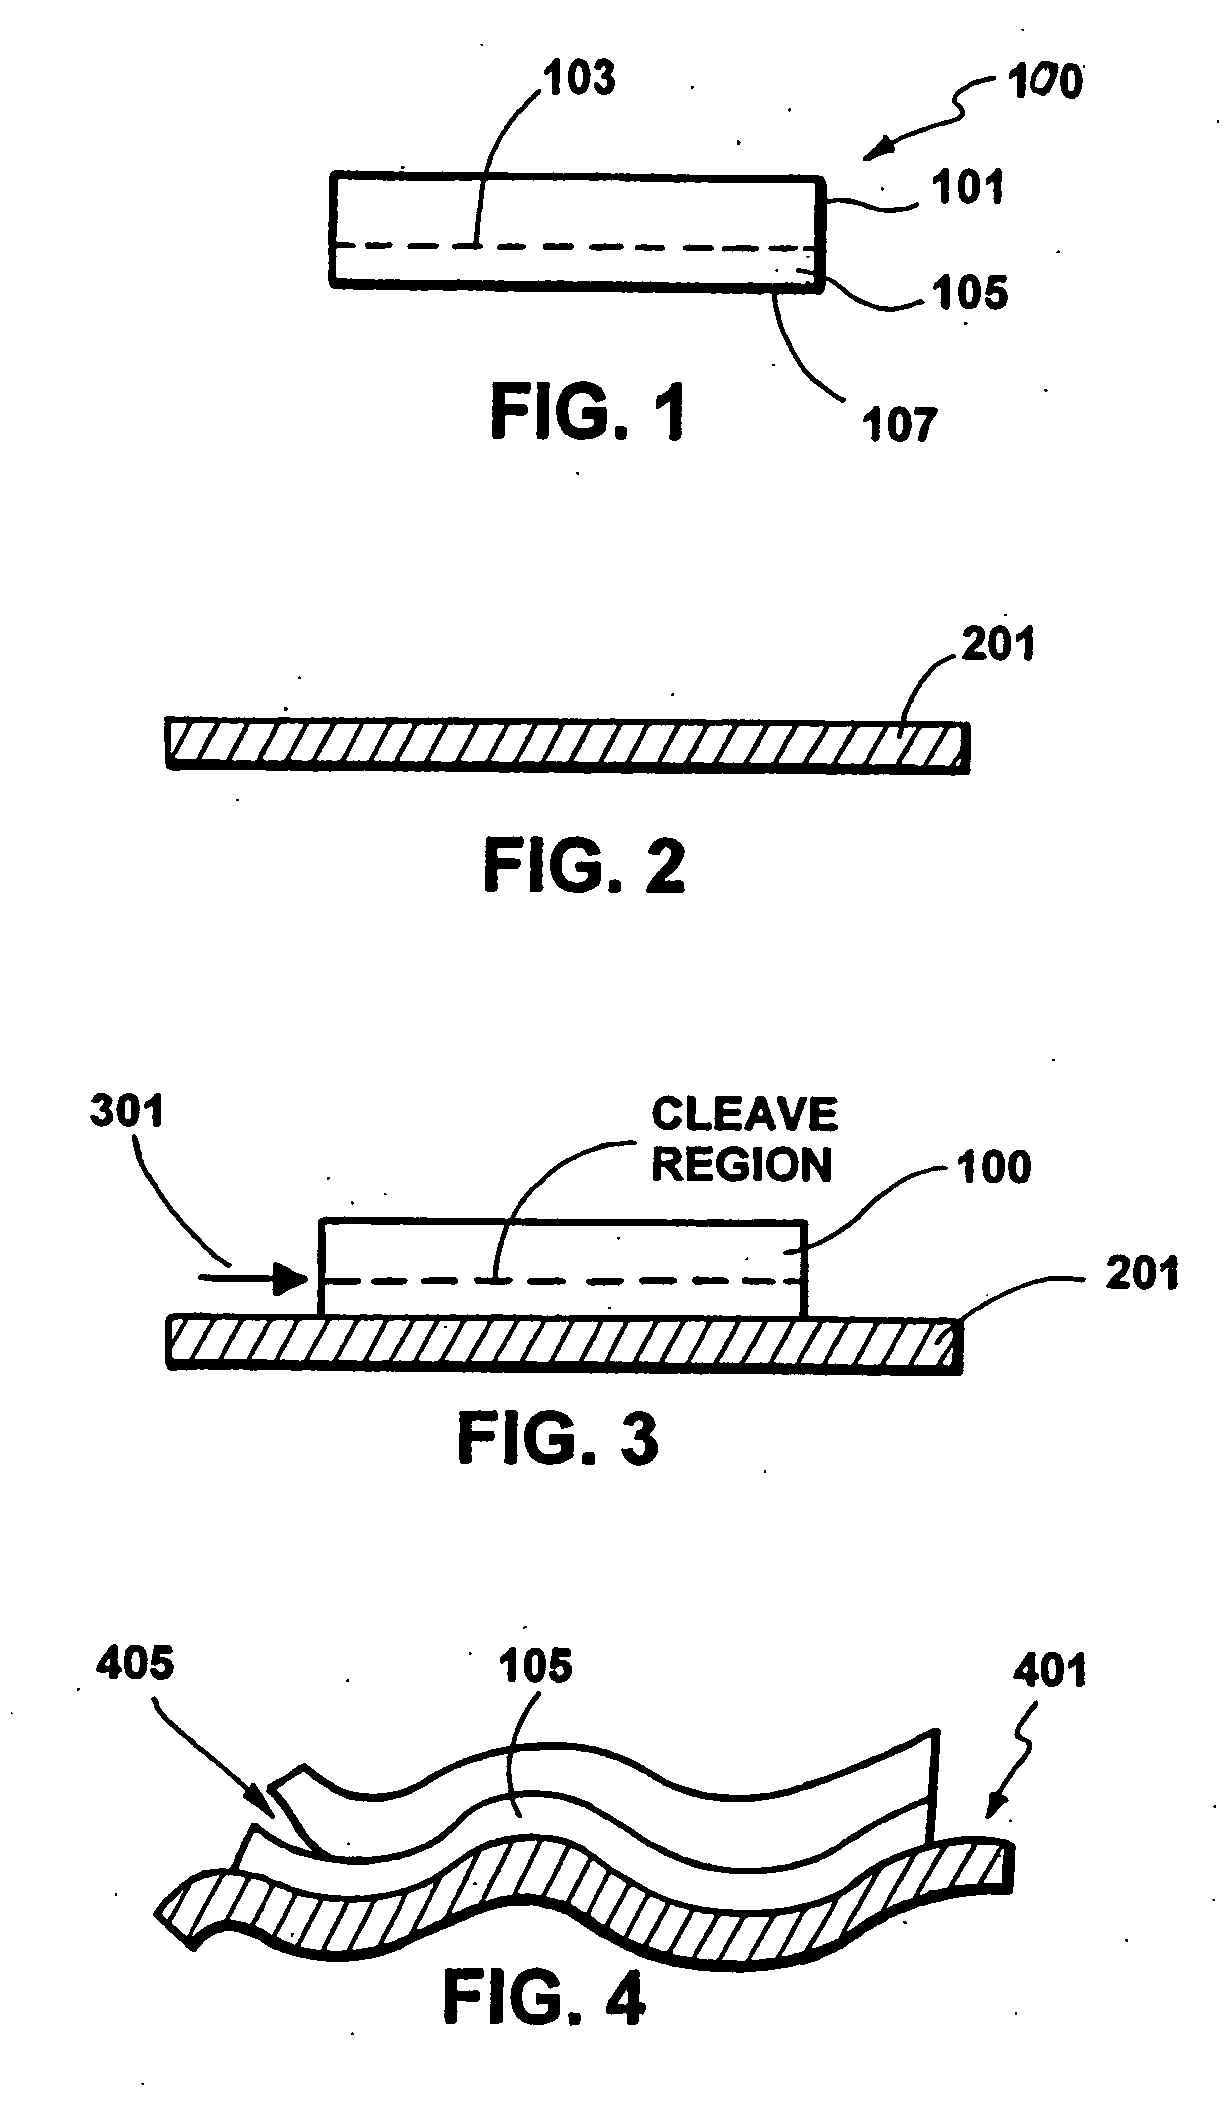 Applications and equipment of substrate stiffness method and resulting devices for layer transfer processes on quartz or glass